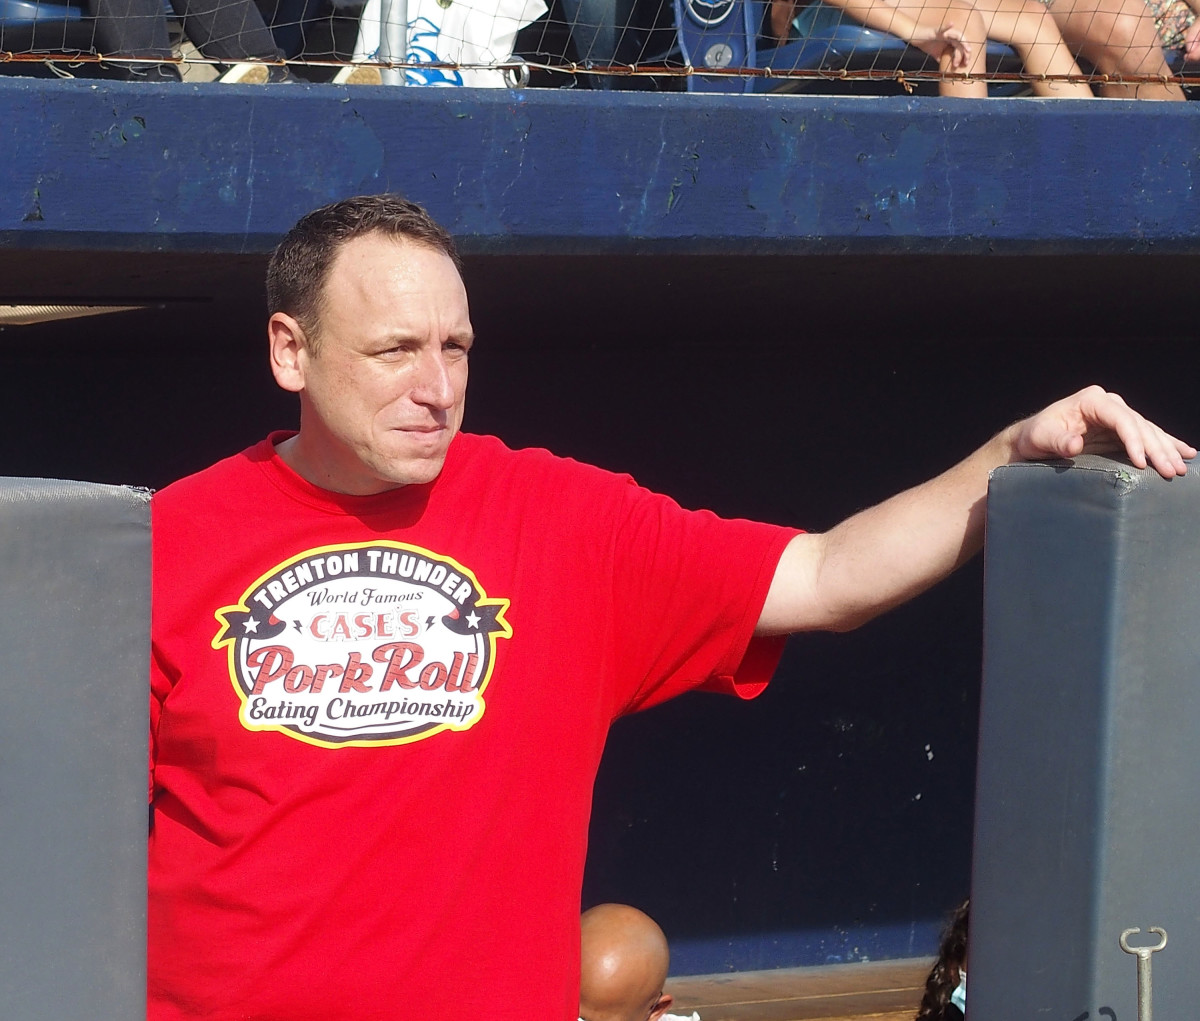 Joey Chestnut before an eating competition in New Jersey.